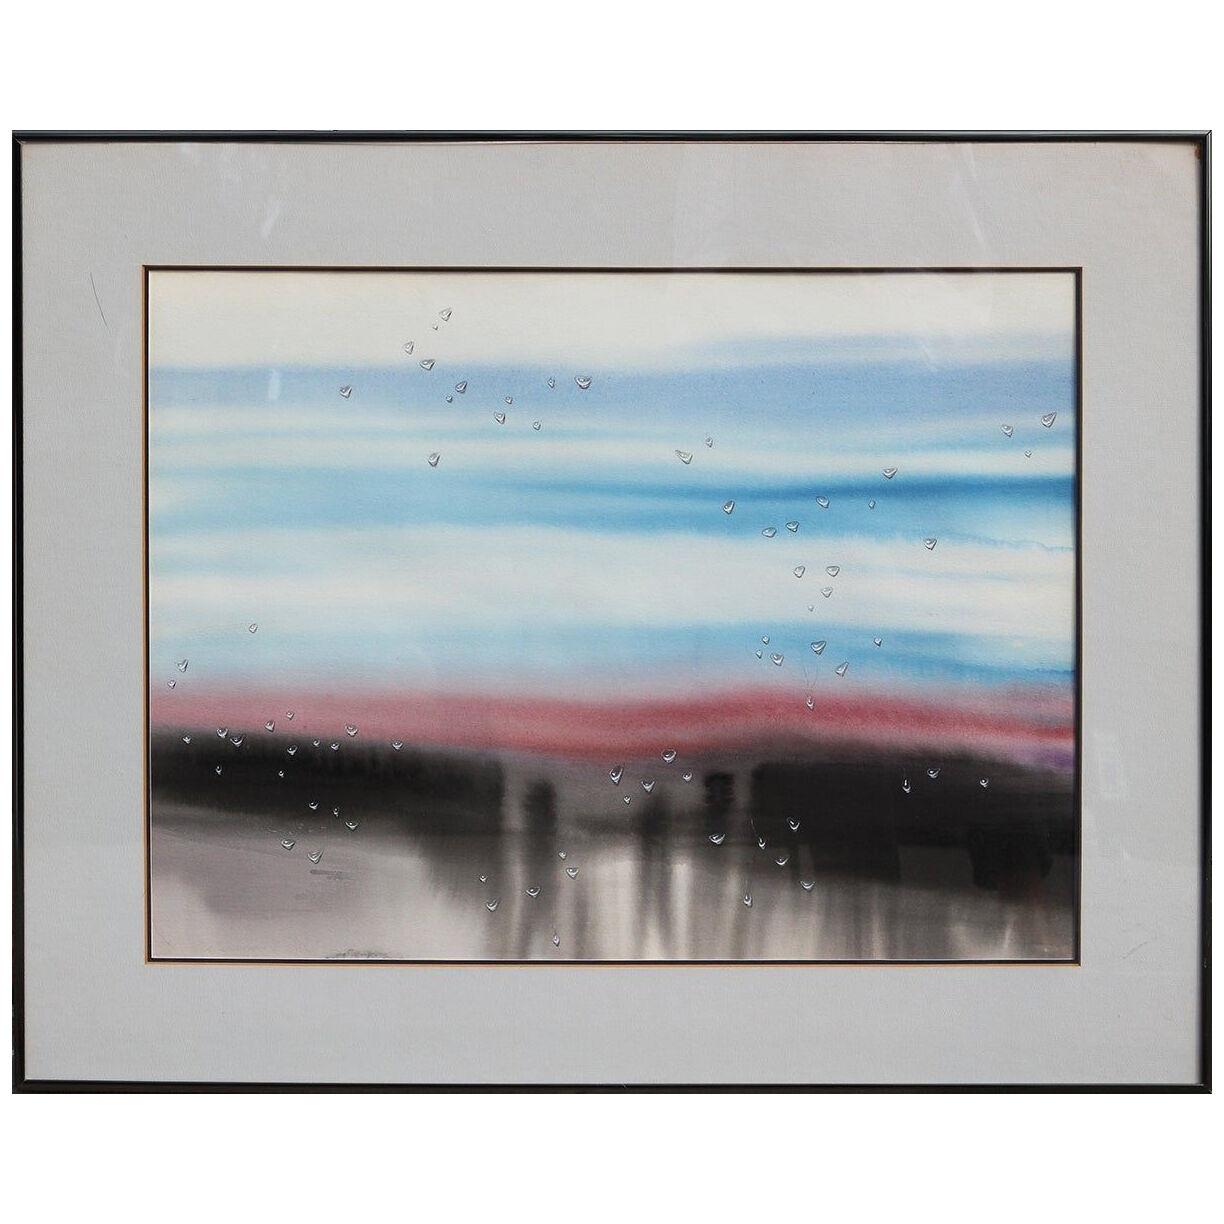 Blue, Red, and Gray Watercolor Surrealist Abstract with Realistic Water Droplets